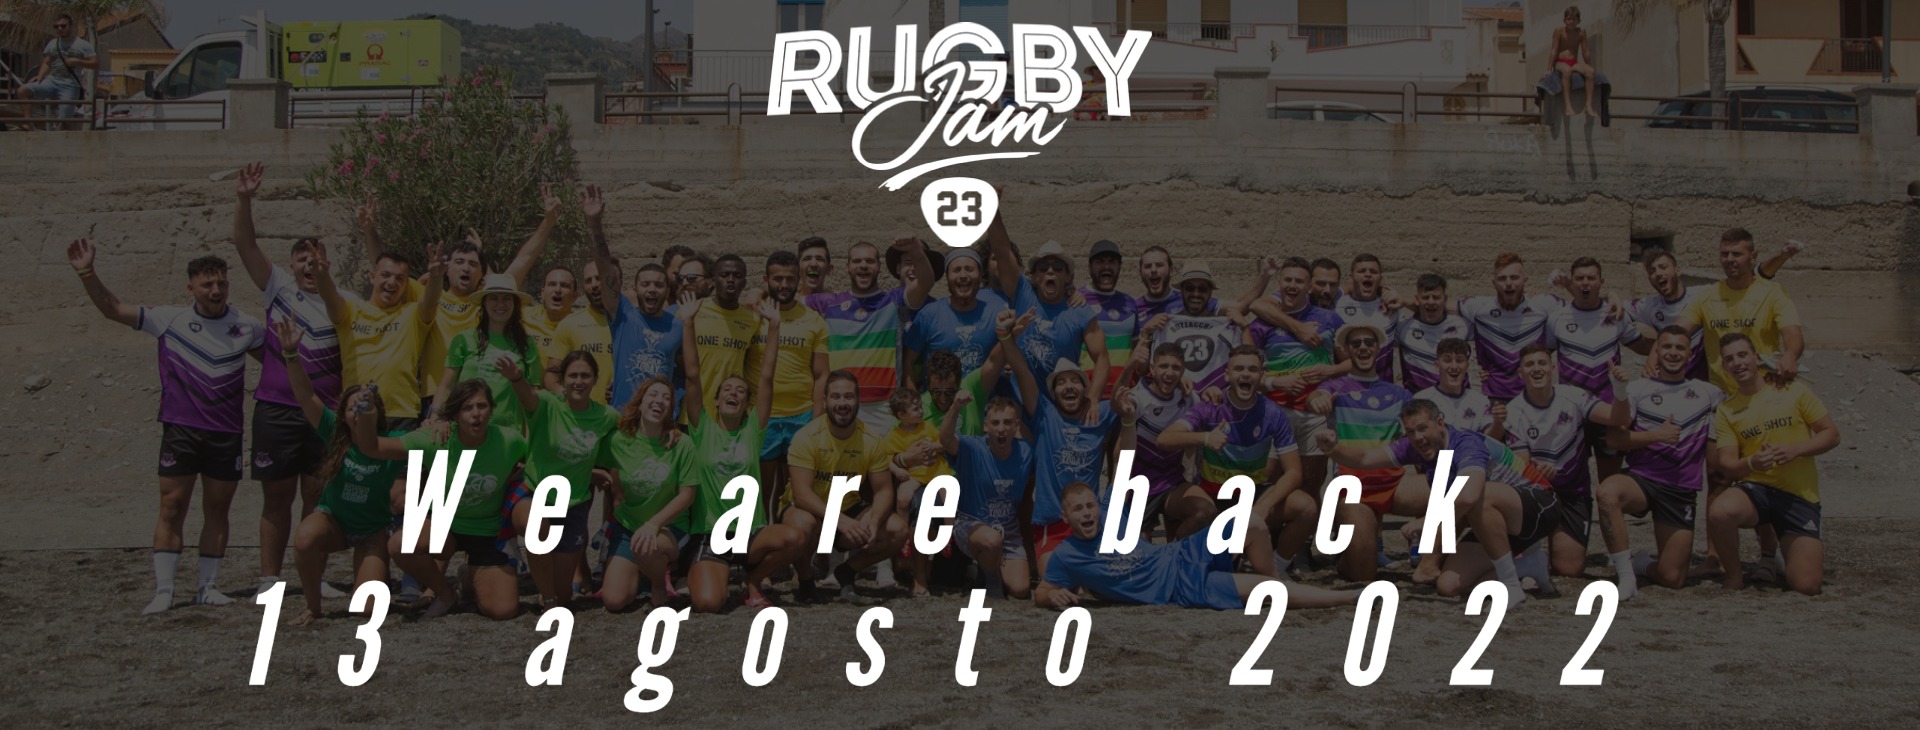 Rugby Jam 2022